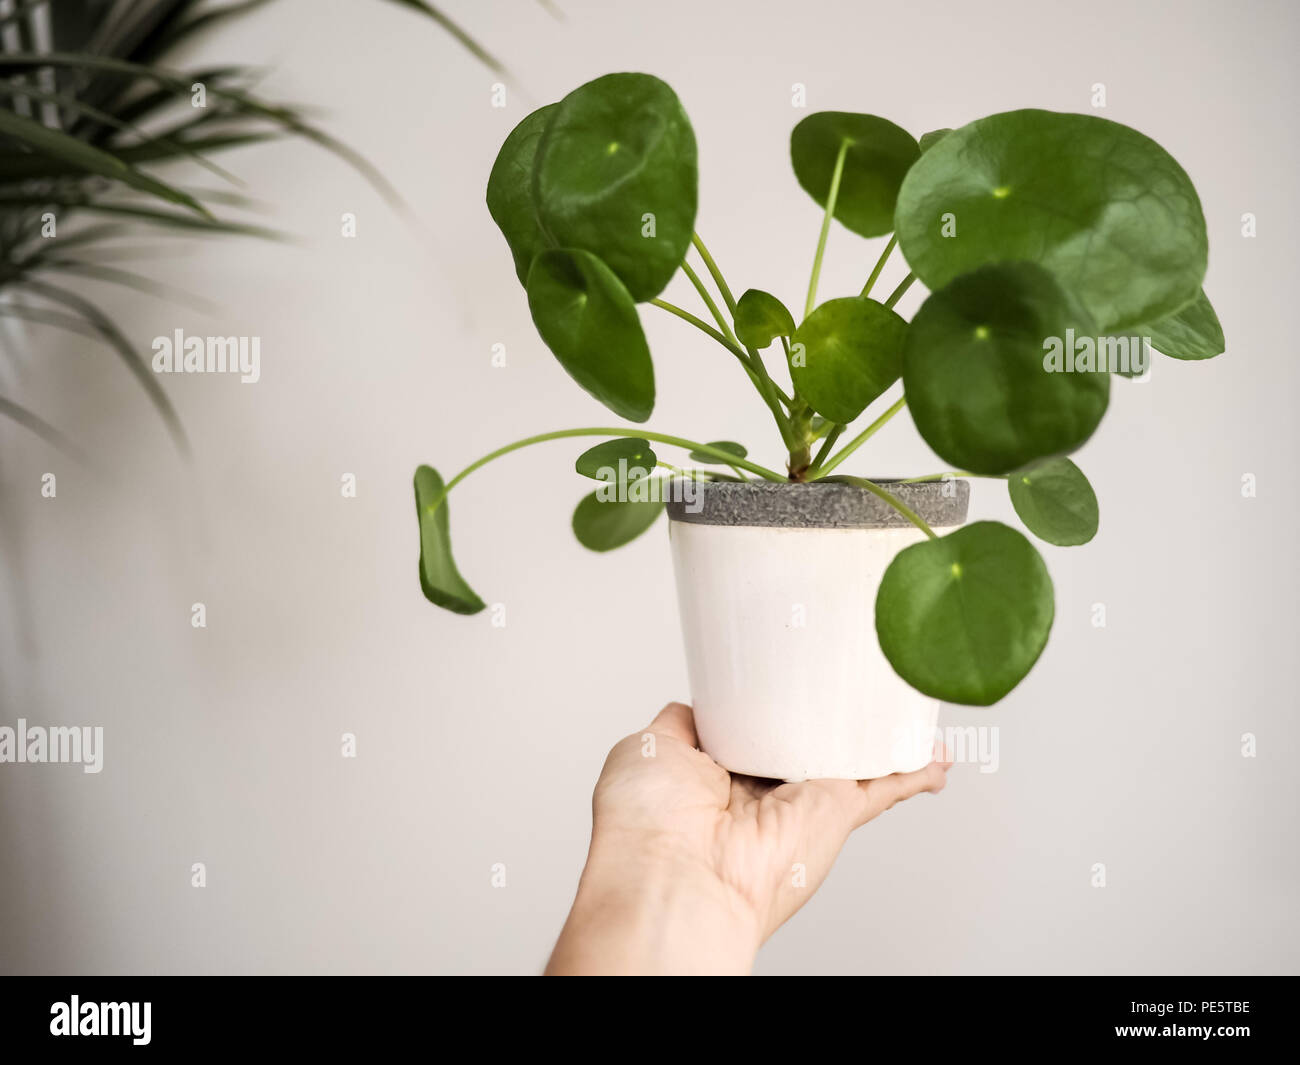 Hand holding a pilea peperomioides ( urticaceae) in a white pot against a white background Stock Photo